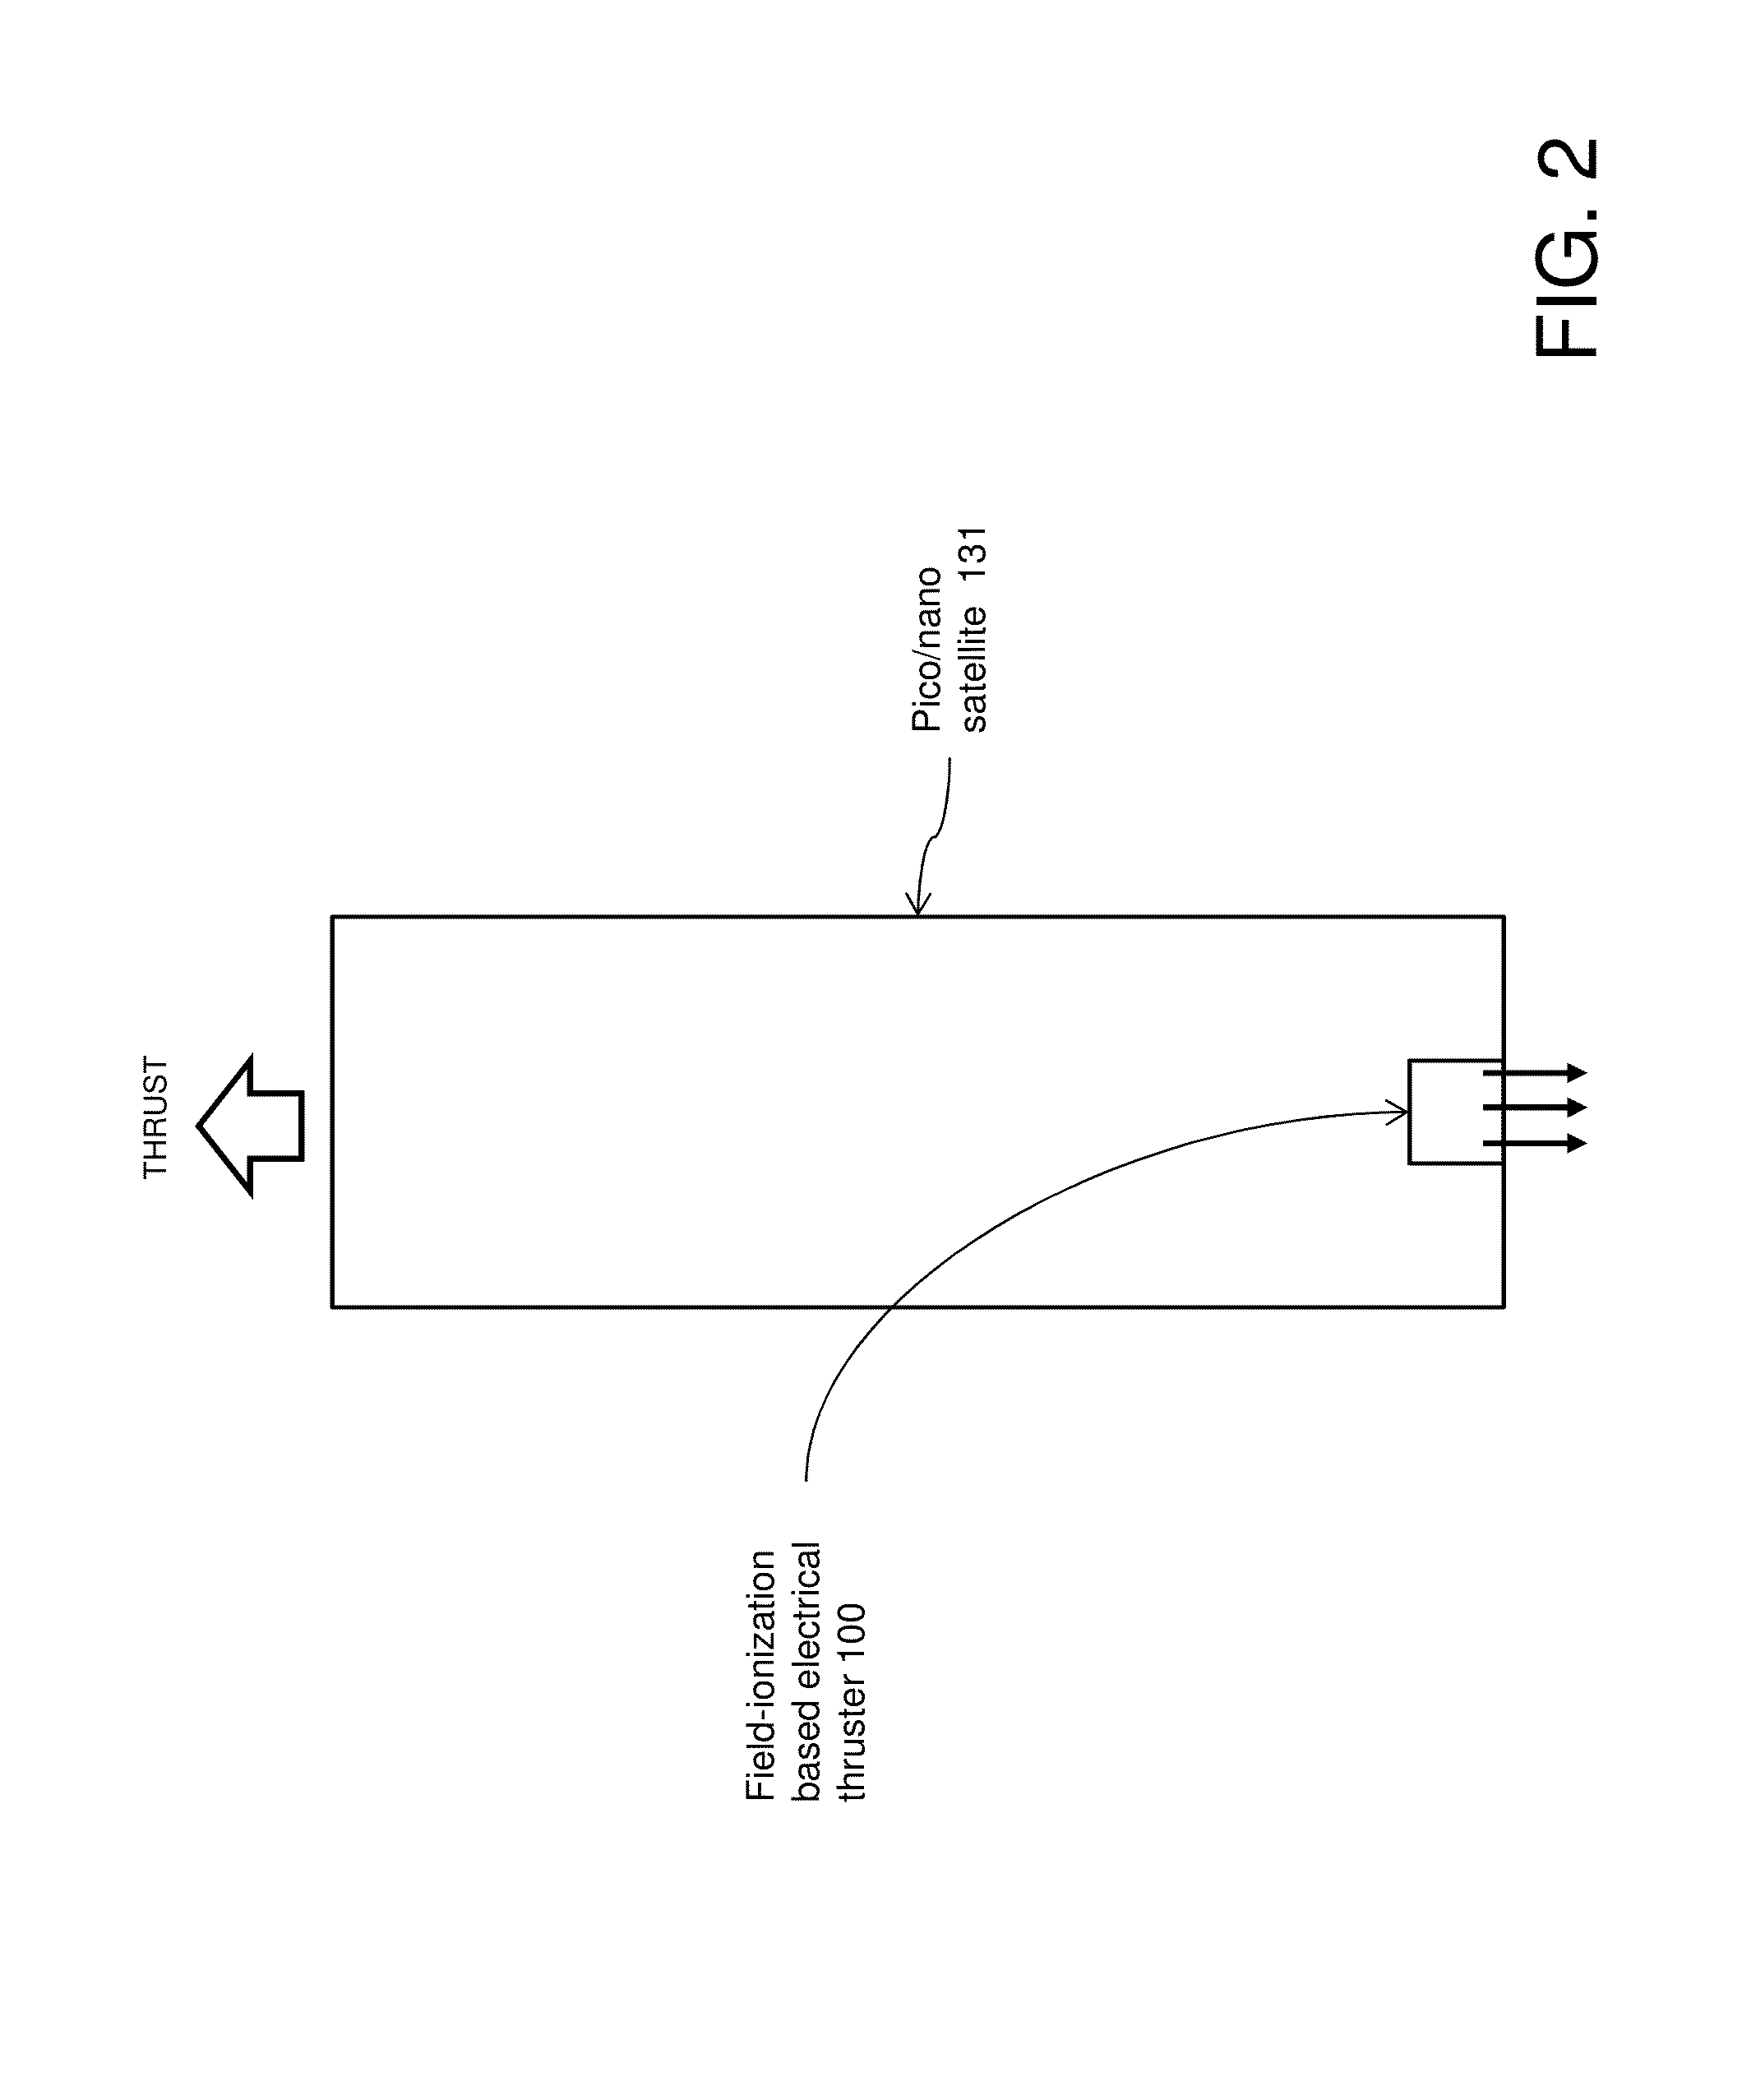 Field-ionization based electrical space ion thruster using a permeable substrate